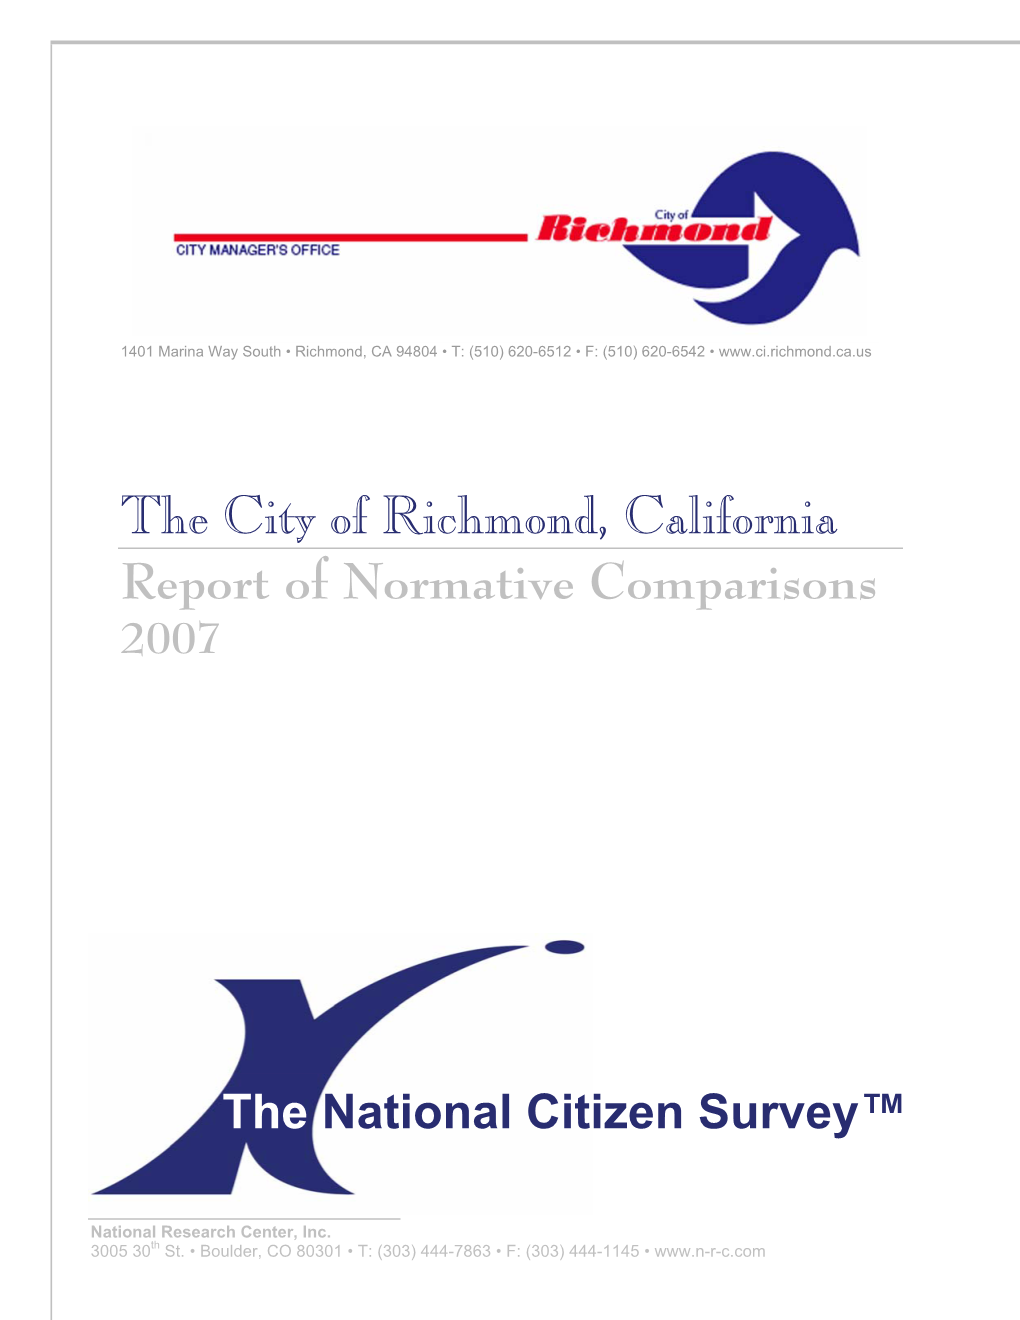 The City of Richmond, California Report of Normative Comparisons 2007